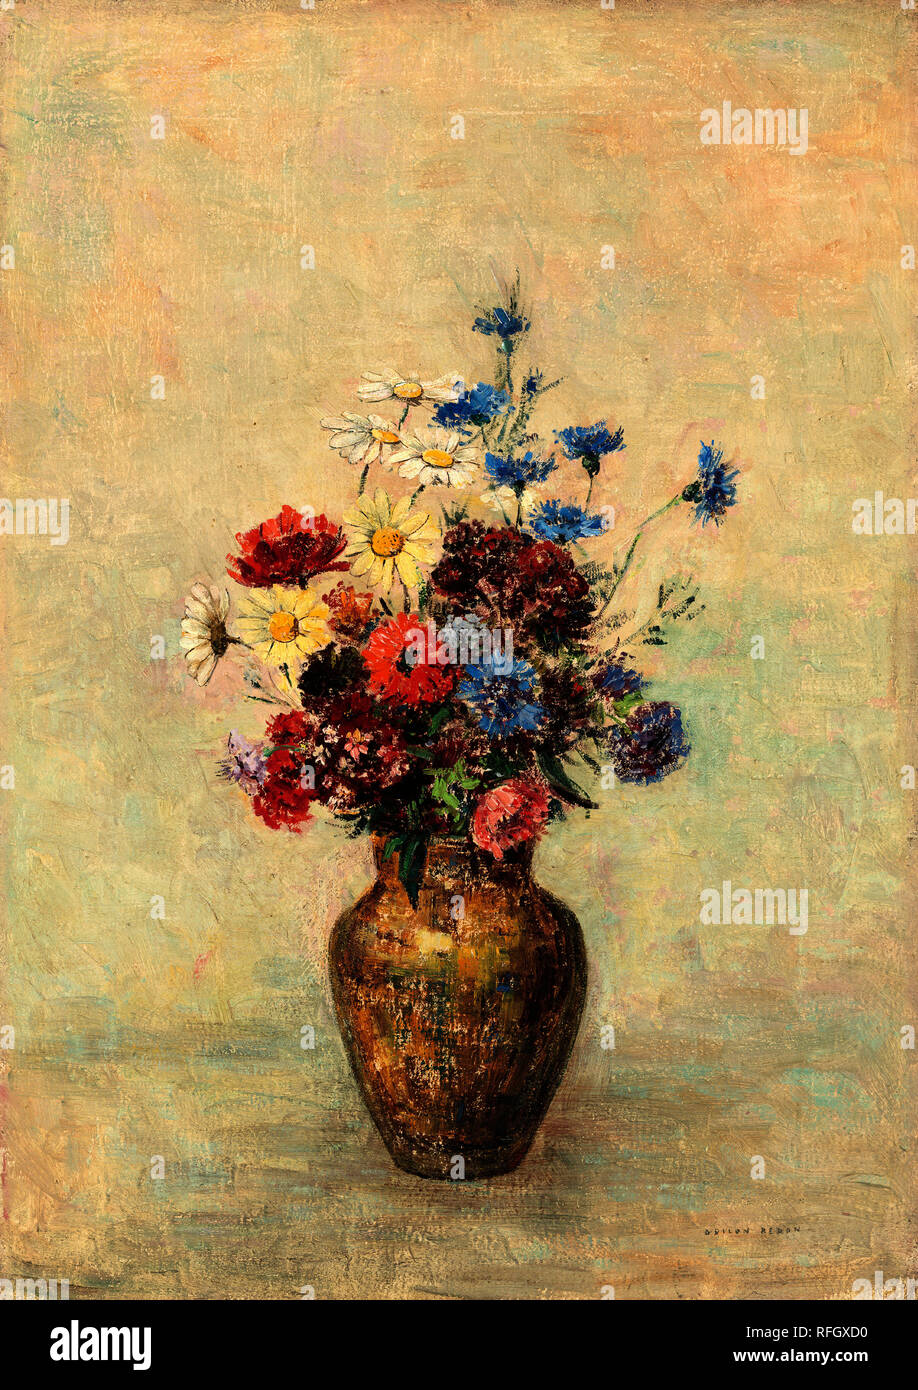 Flowers in a Vase. Dated: c. 1910. Dimensions: overall: 55.9 x 39.4 cm (22 x 15 1/2 in.)  framed: 74.3 x 60.6 x 8.3 cm (29 1/4 x 23 7/8 x 3 1/4 in.). Medium: oil on canvas. Museum: National Gallery of Art, Washington DC. Author: Odilon Redon. Stock Photo